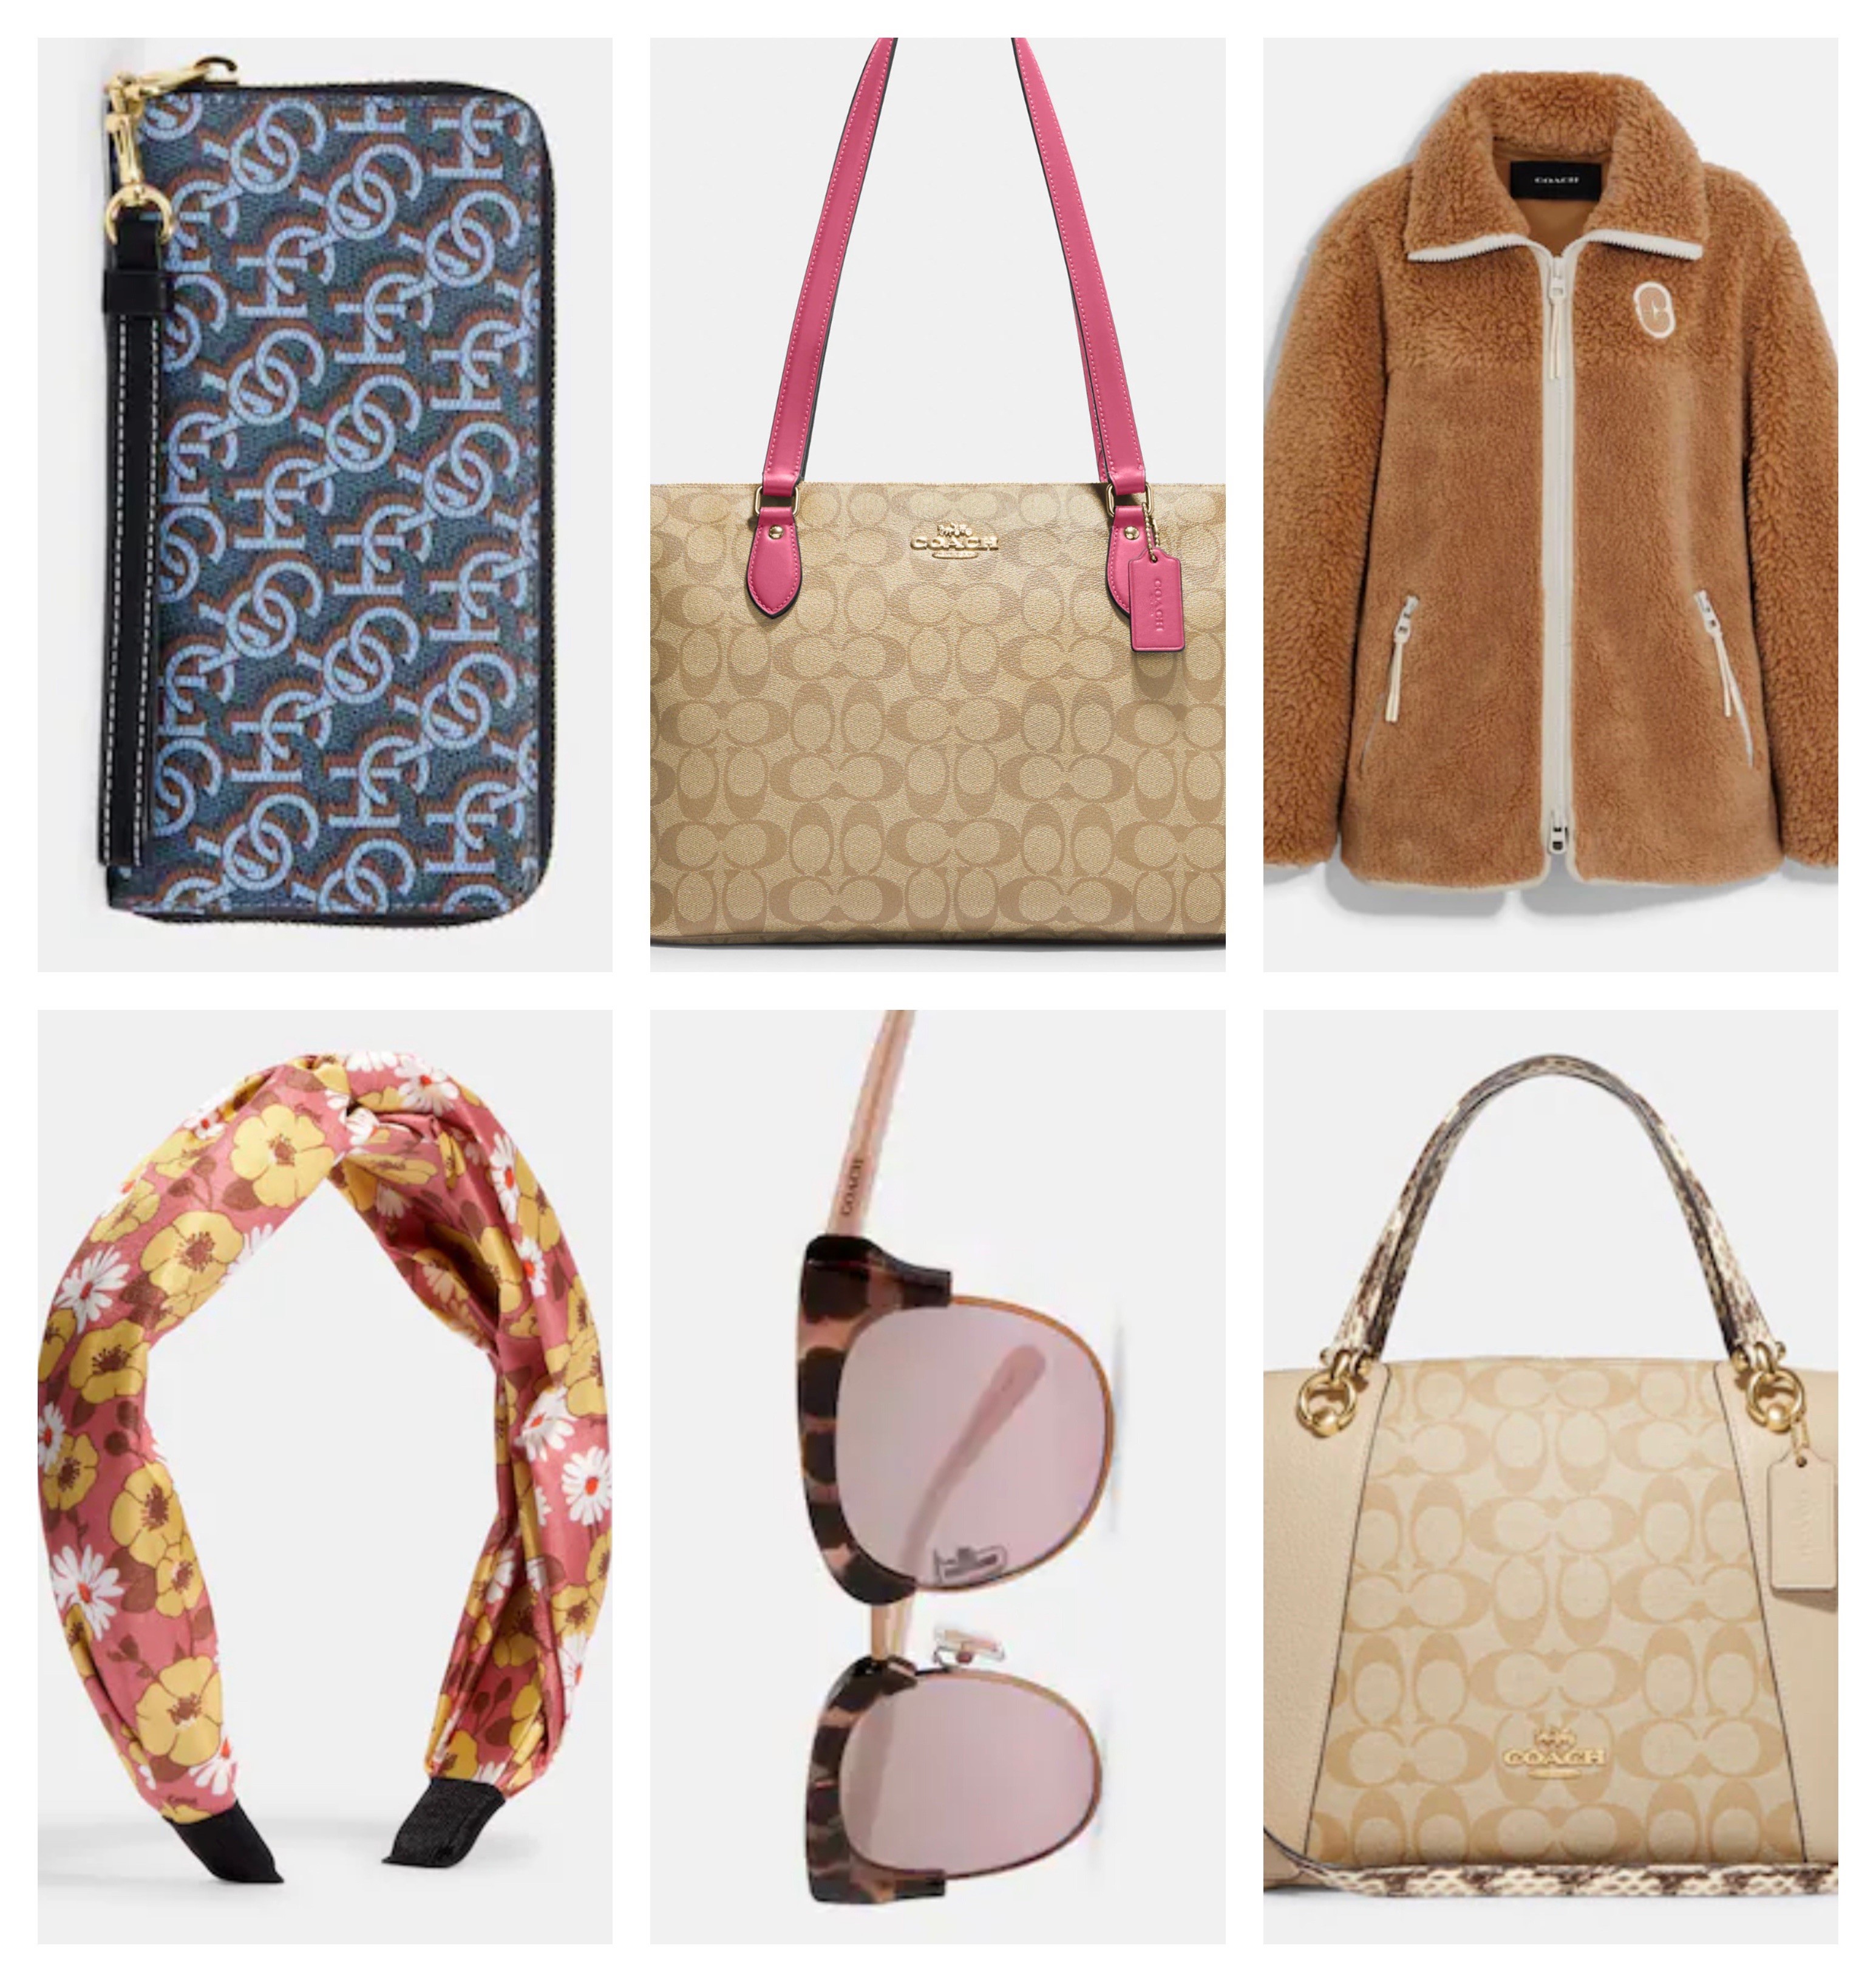 COACH Outlet Clearance Sale 70% Off